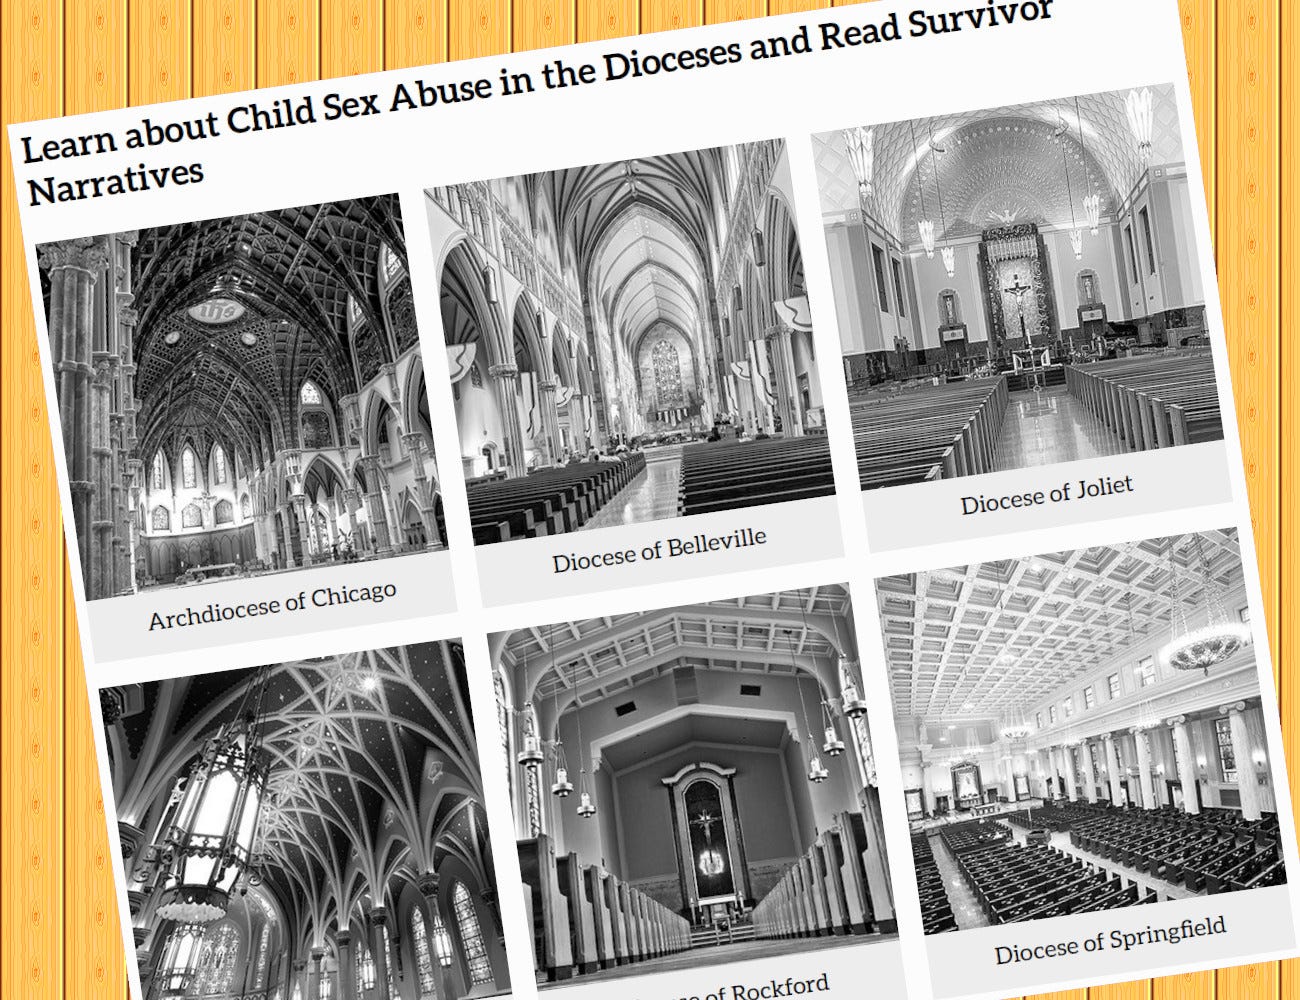 Image of cathedral interiors with headline about child abuse